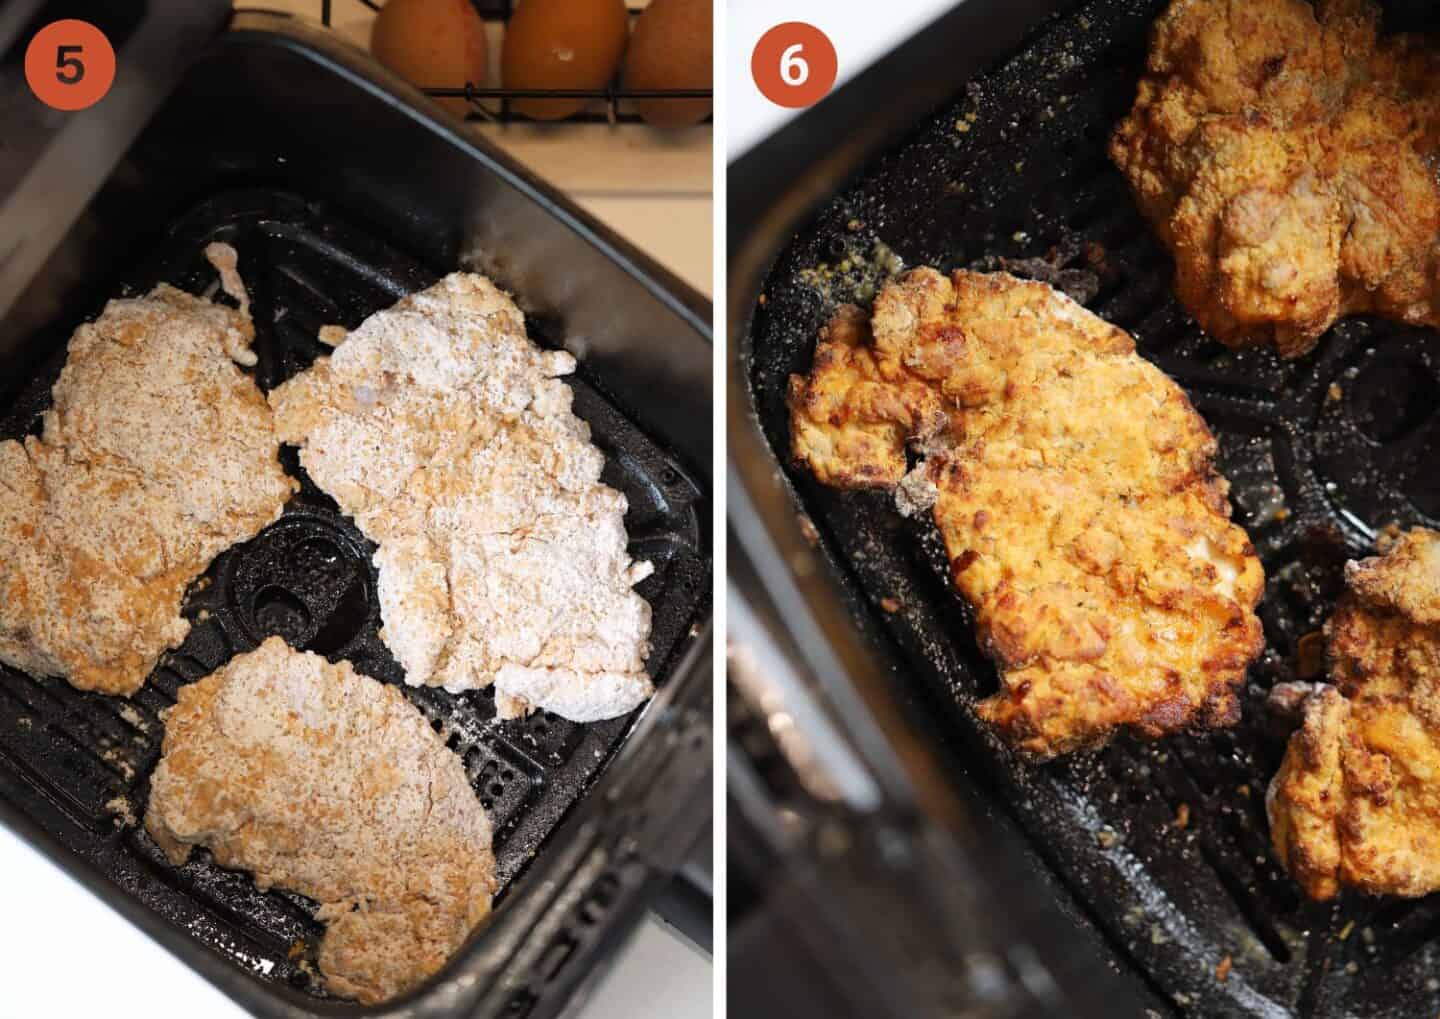 The buttermilk fried chicken before (left) and after (right) frying.